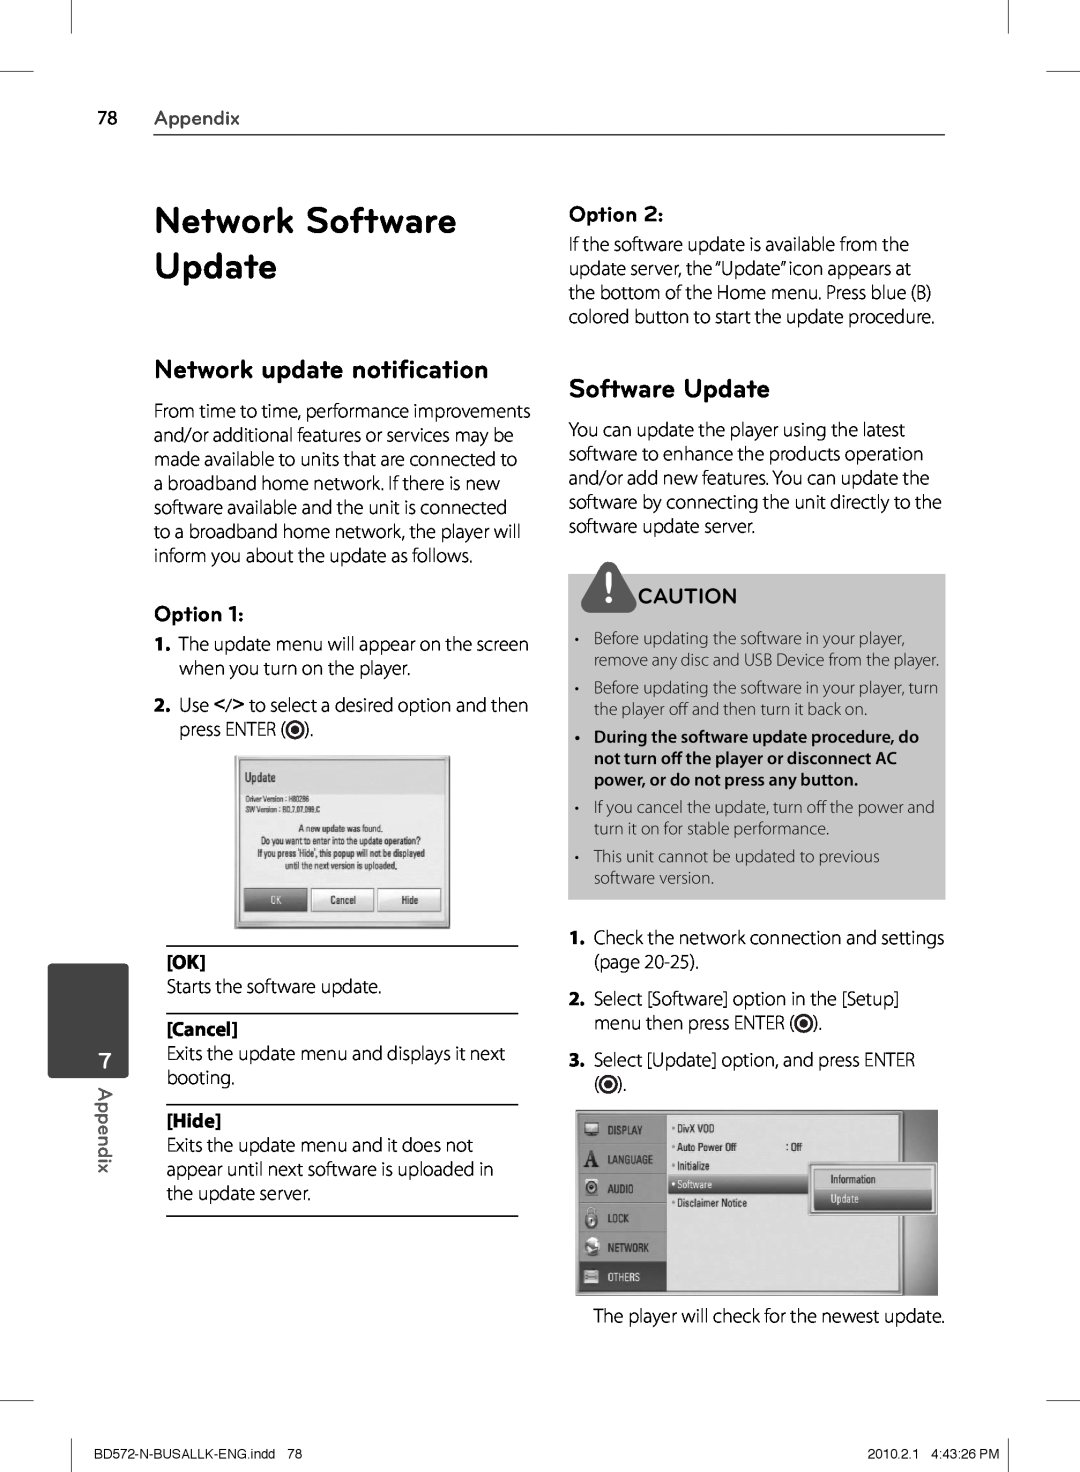 LG Electronics BD570 owner manual Network Software Update, Network update notiﬁcation, Option, Appendix 